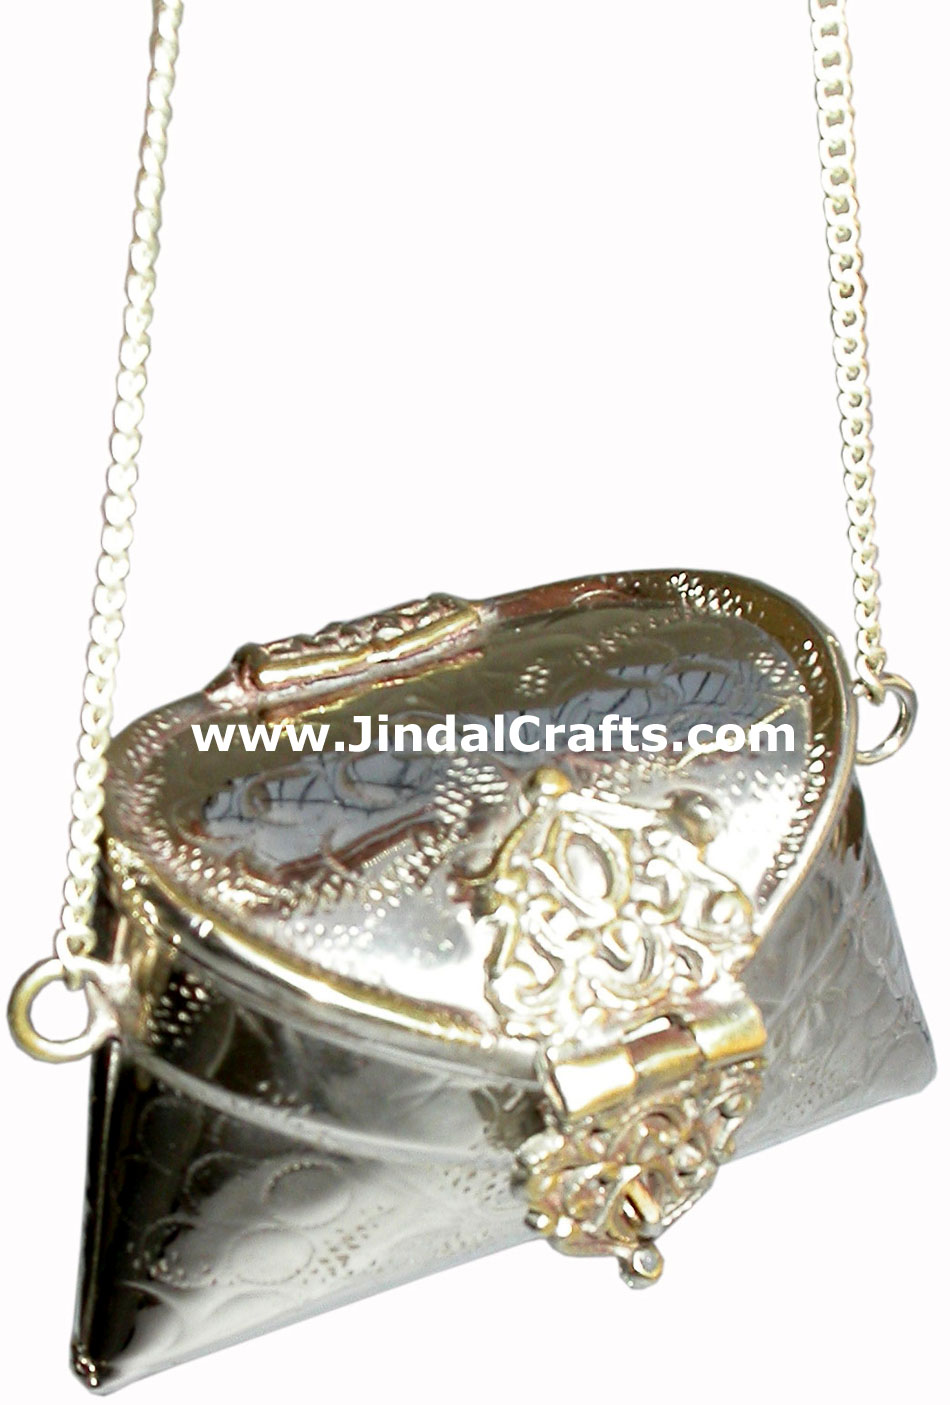 Hand Made Traditional Chain Small Purse from India